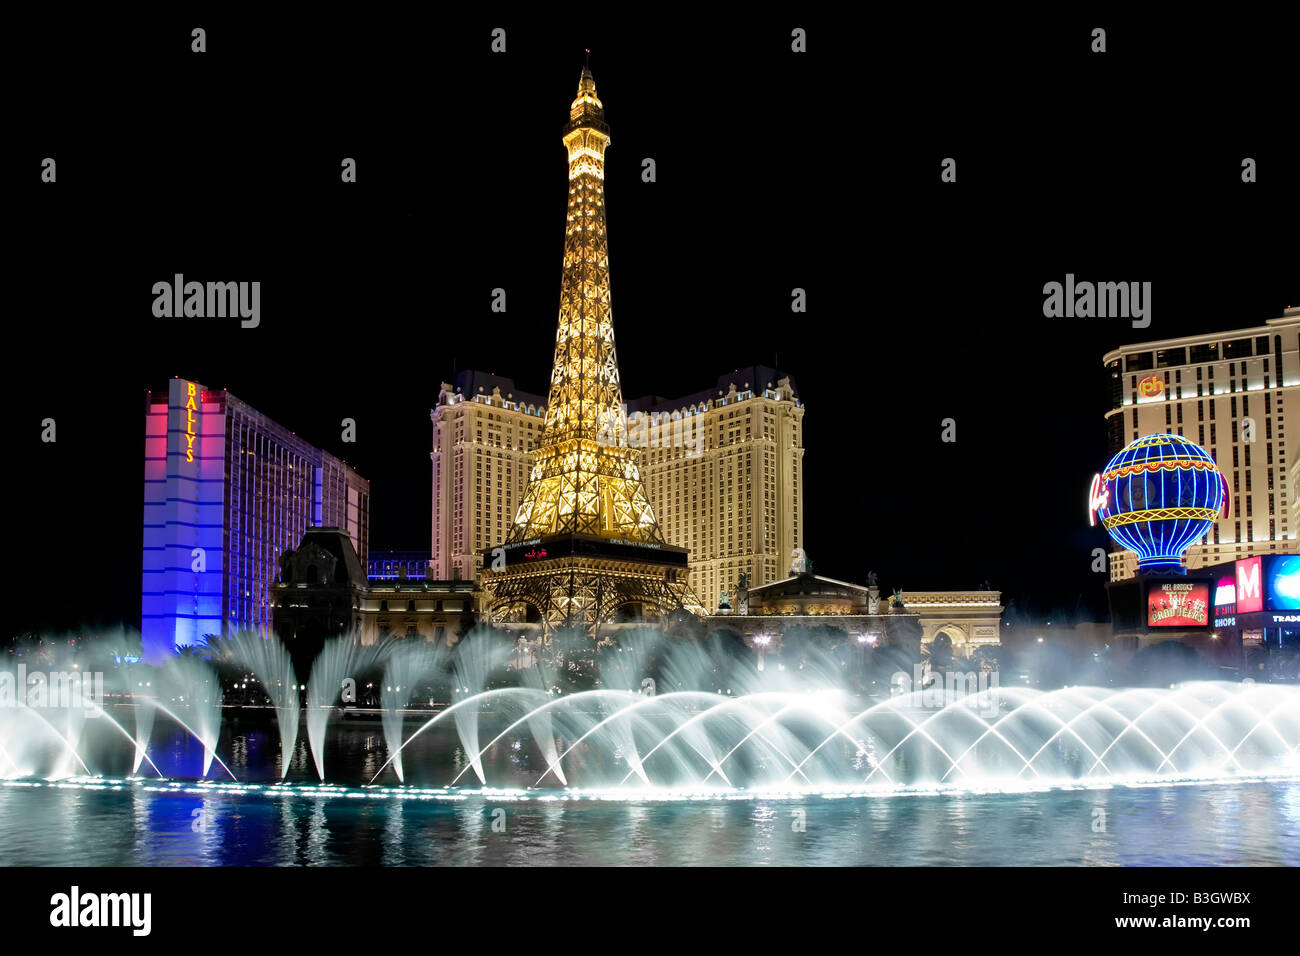 The beautiful display of the bellagio fountains in Las vegas Stock Photo